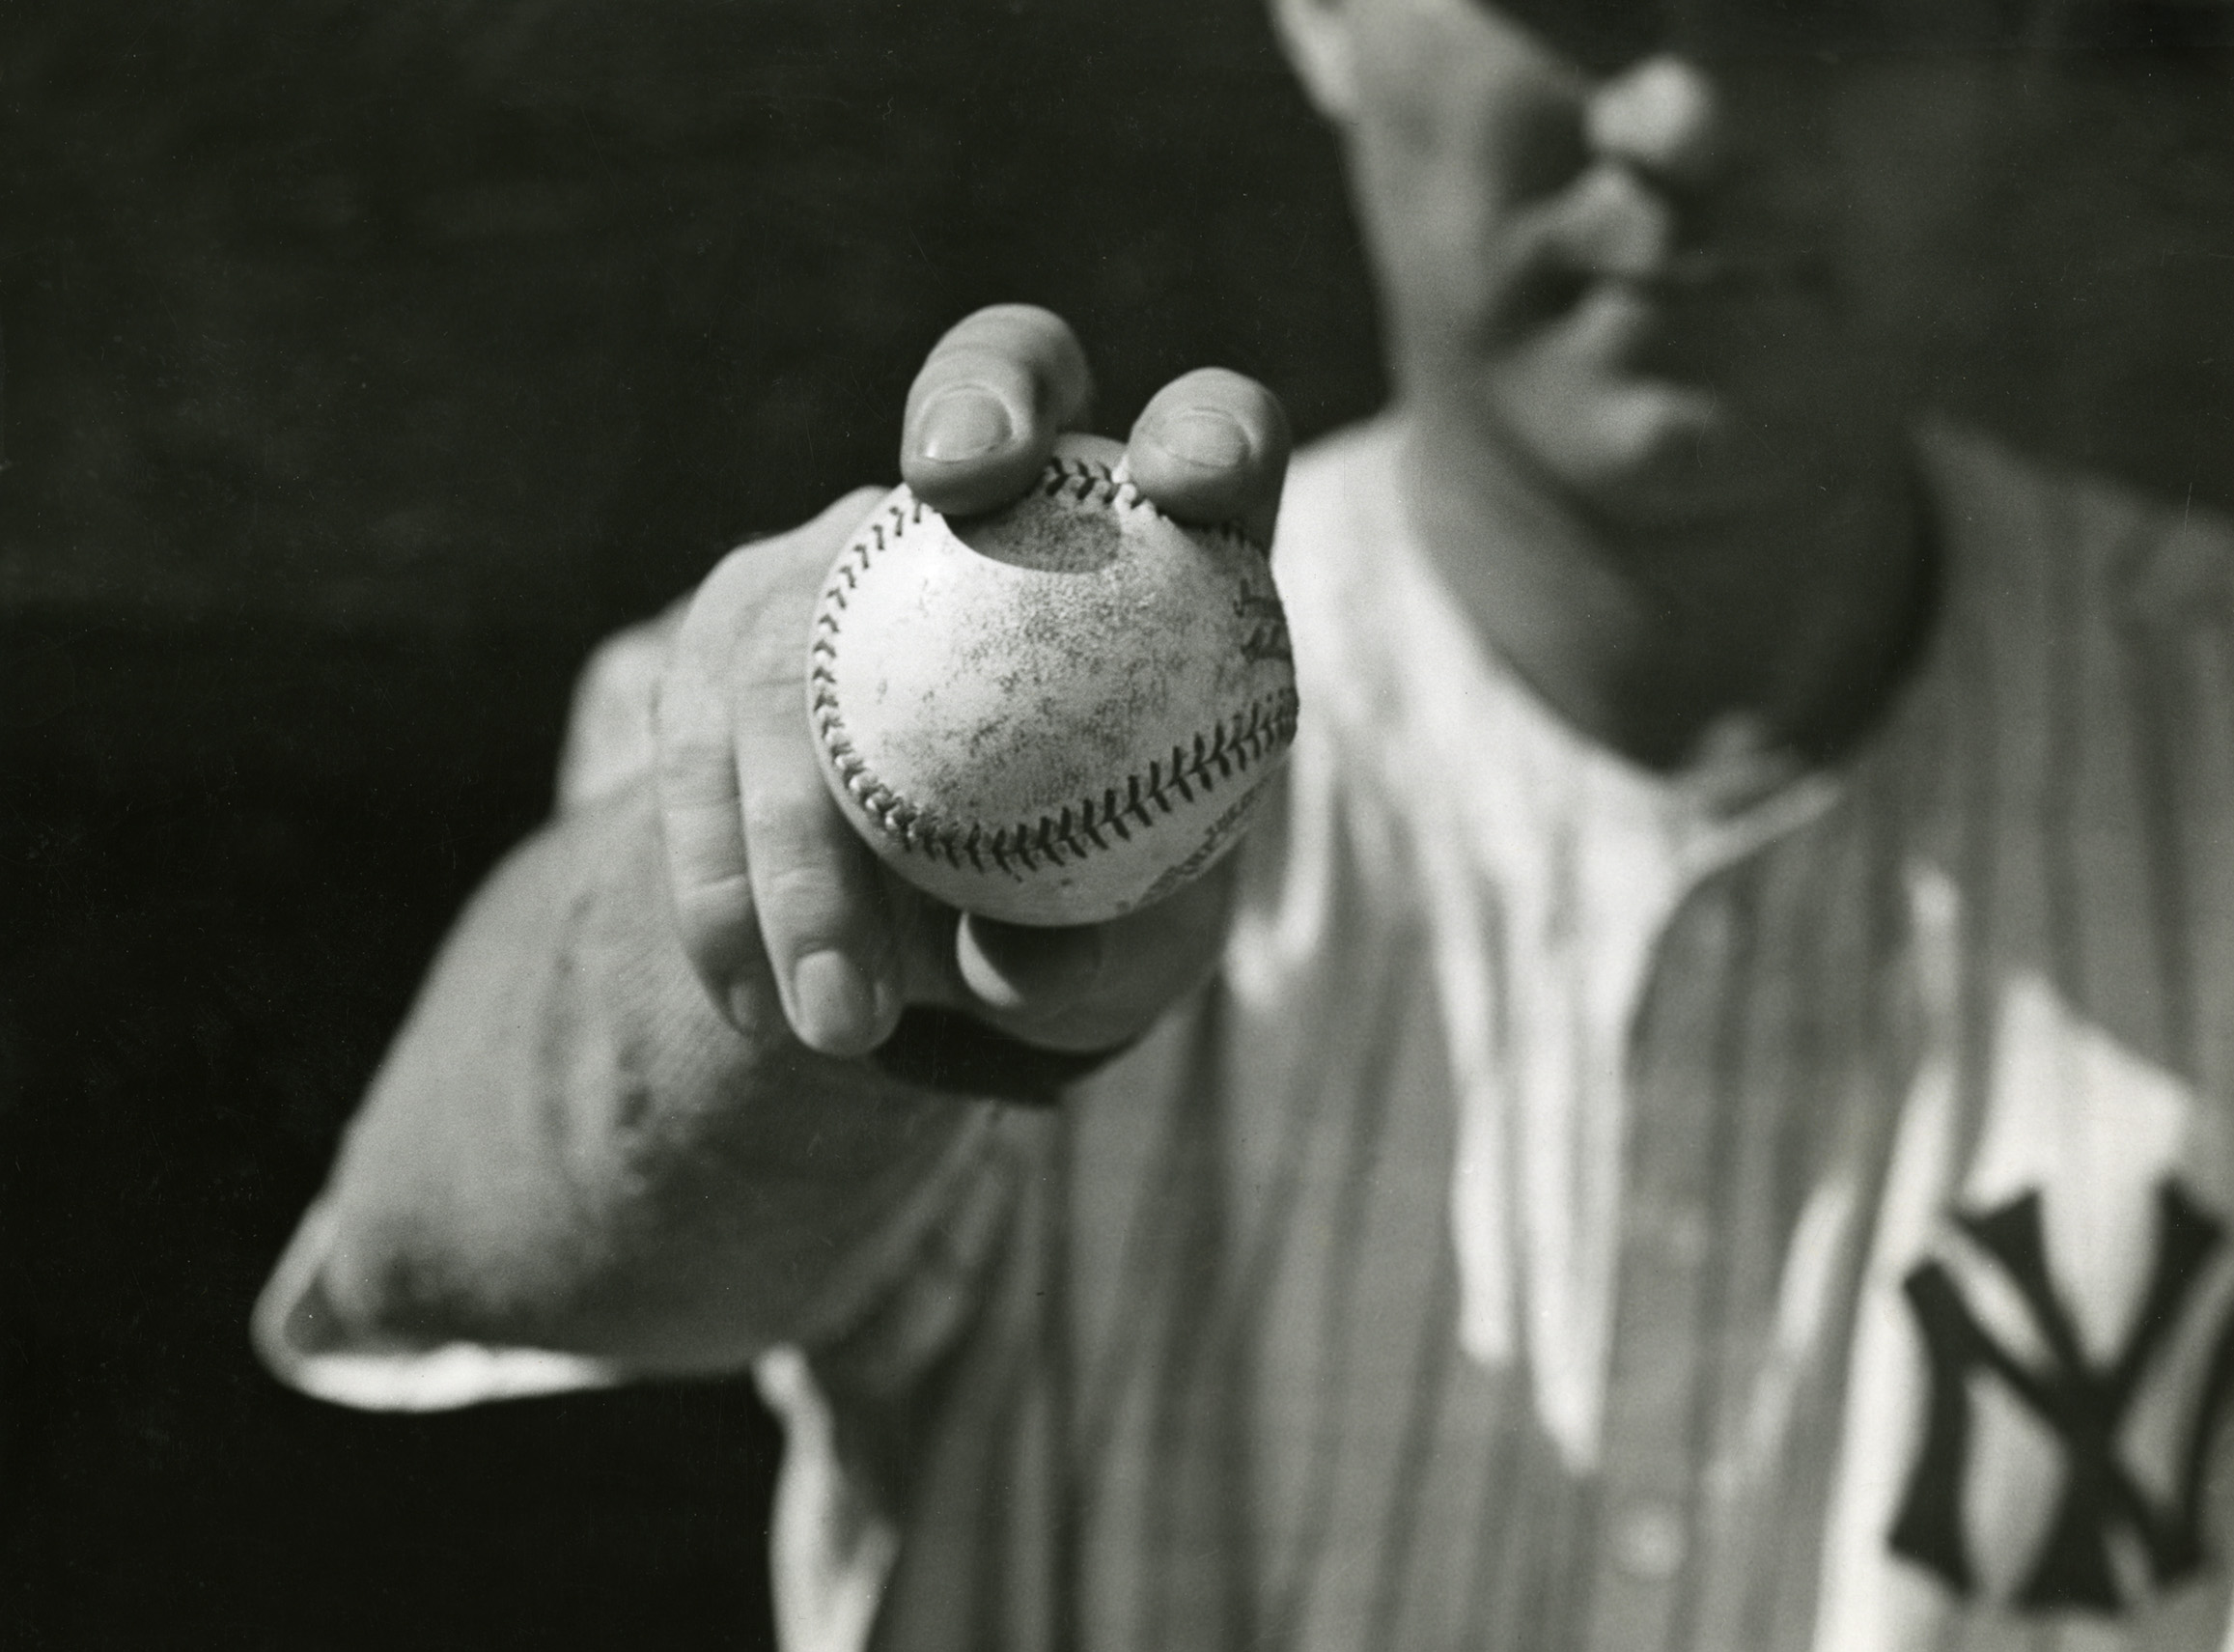 Image credit: "Red Ruffing’s fastball grip" by William C. Greene, c. 1938, 17 1⁄2” H x 21 1⁄2” W, PAP.28